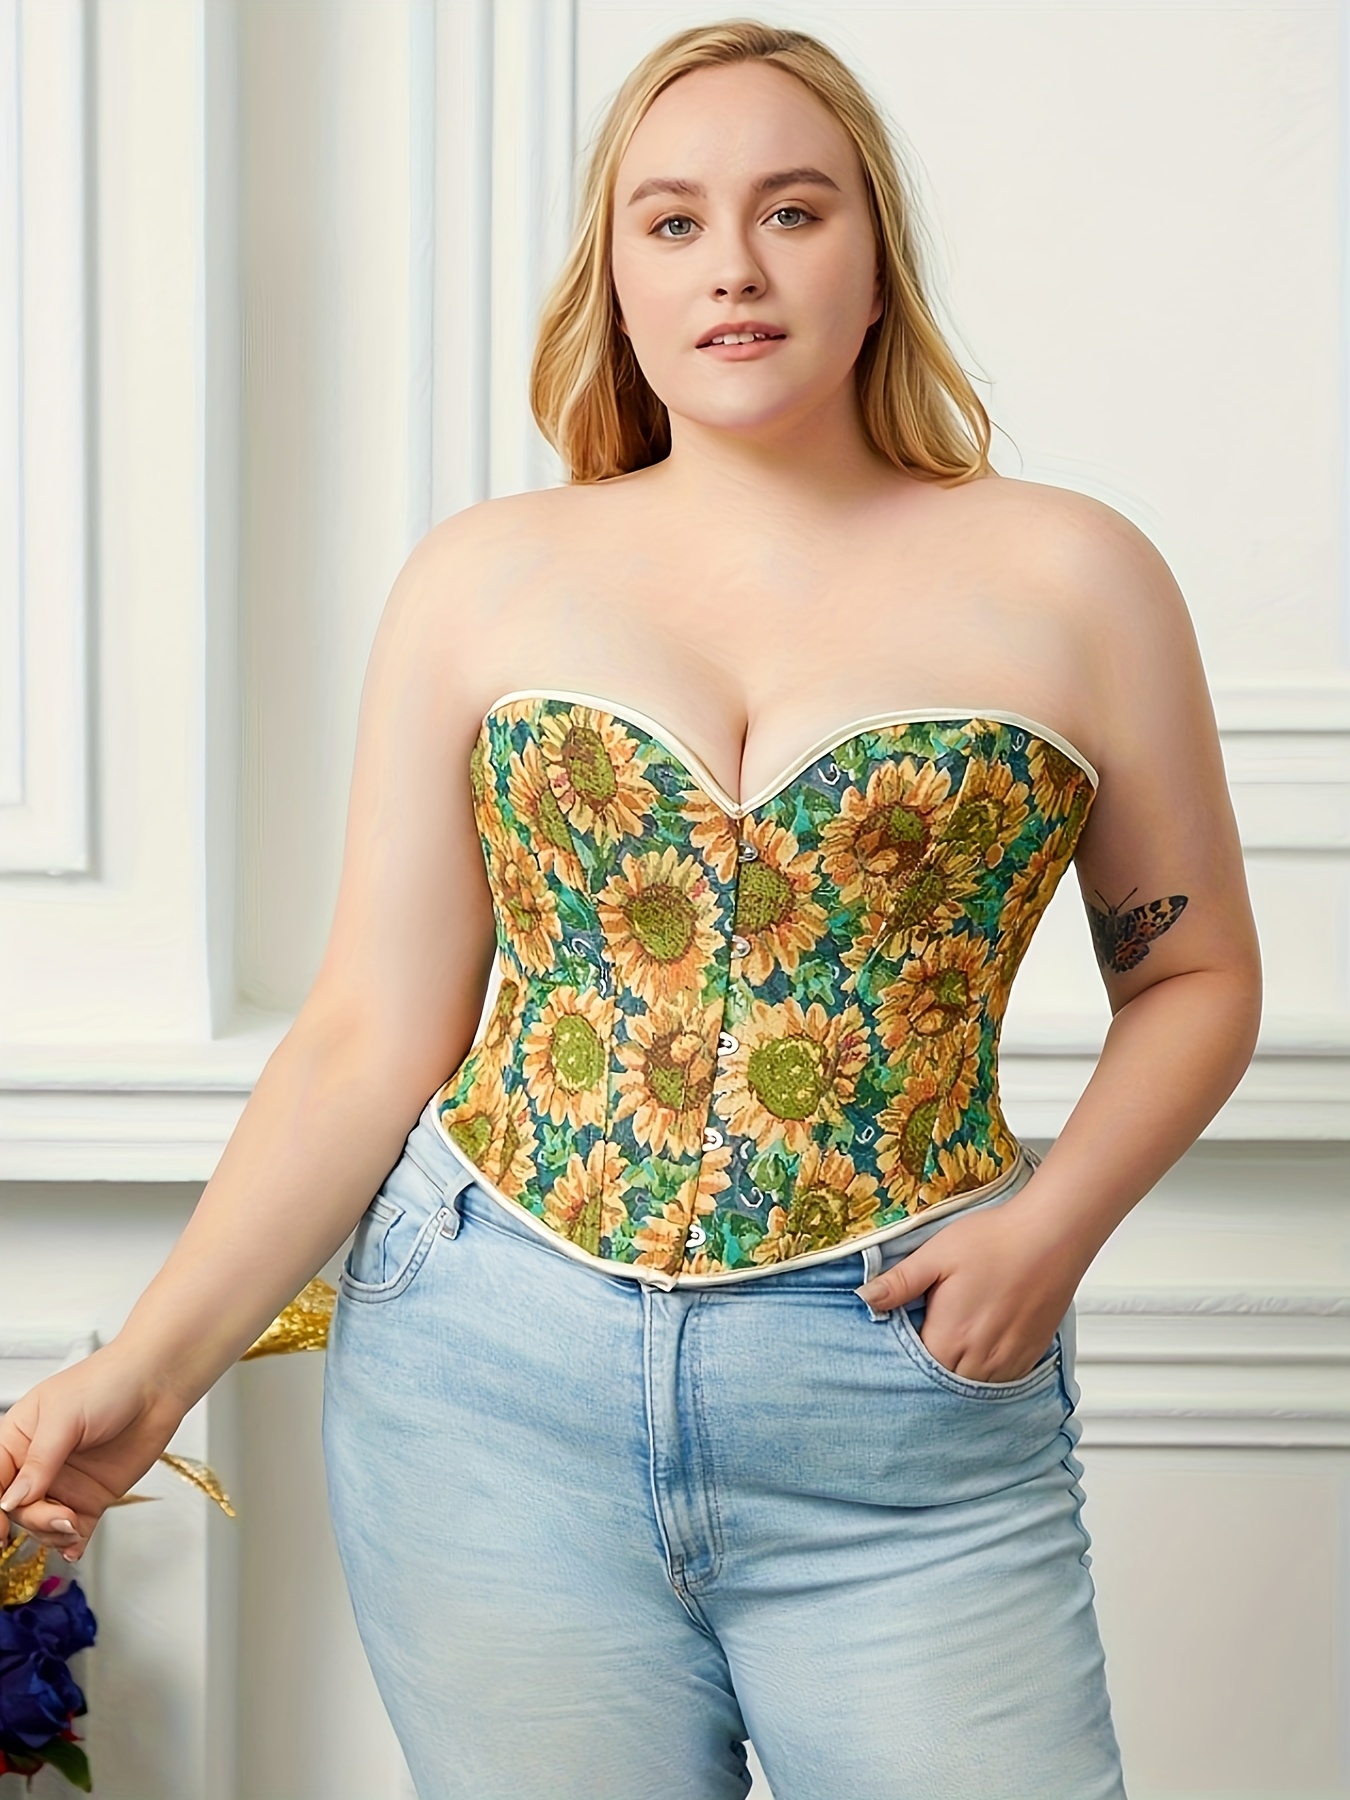 Corset top for big bust and tummy  Bustier top outfits, Plus size corset  dress, Plus size corset tops